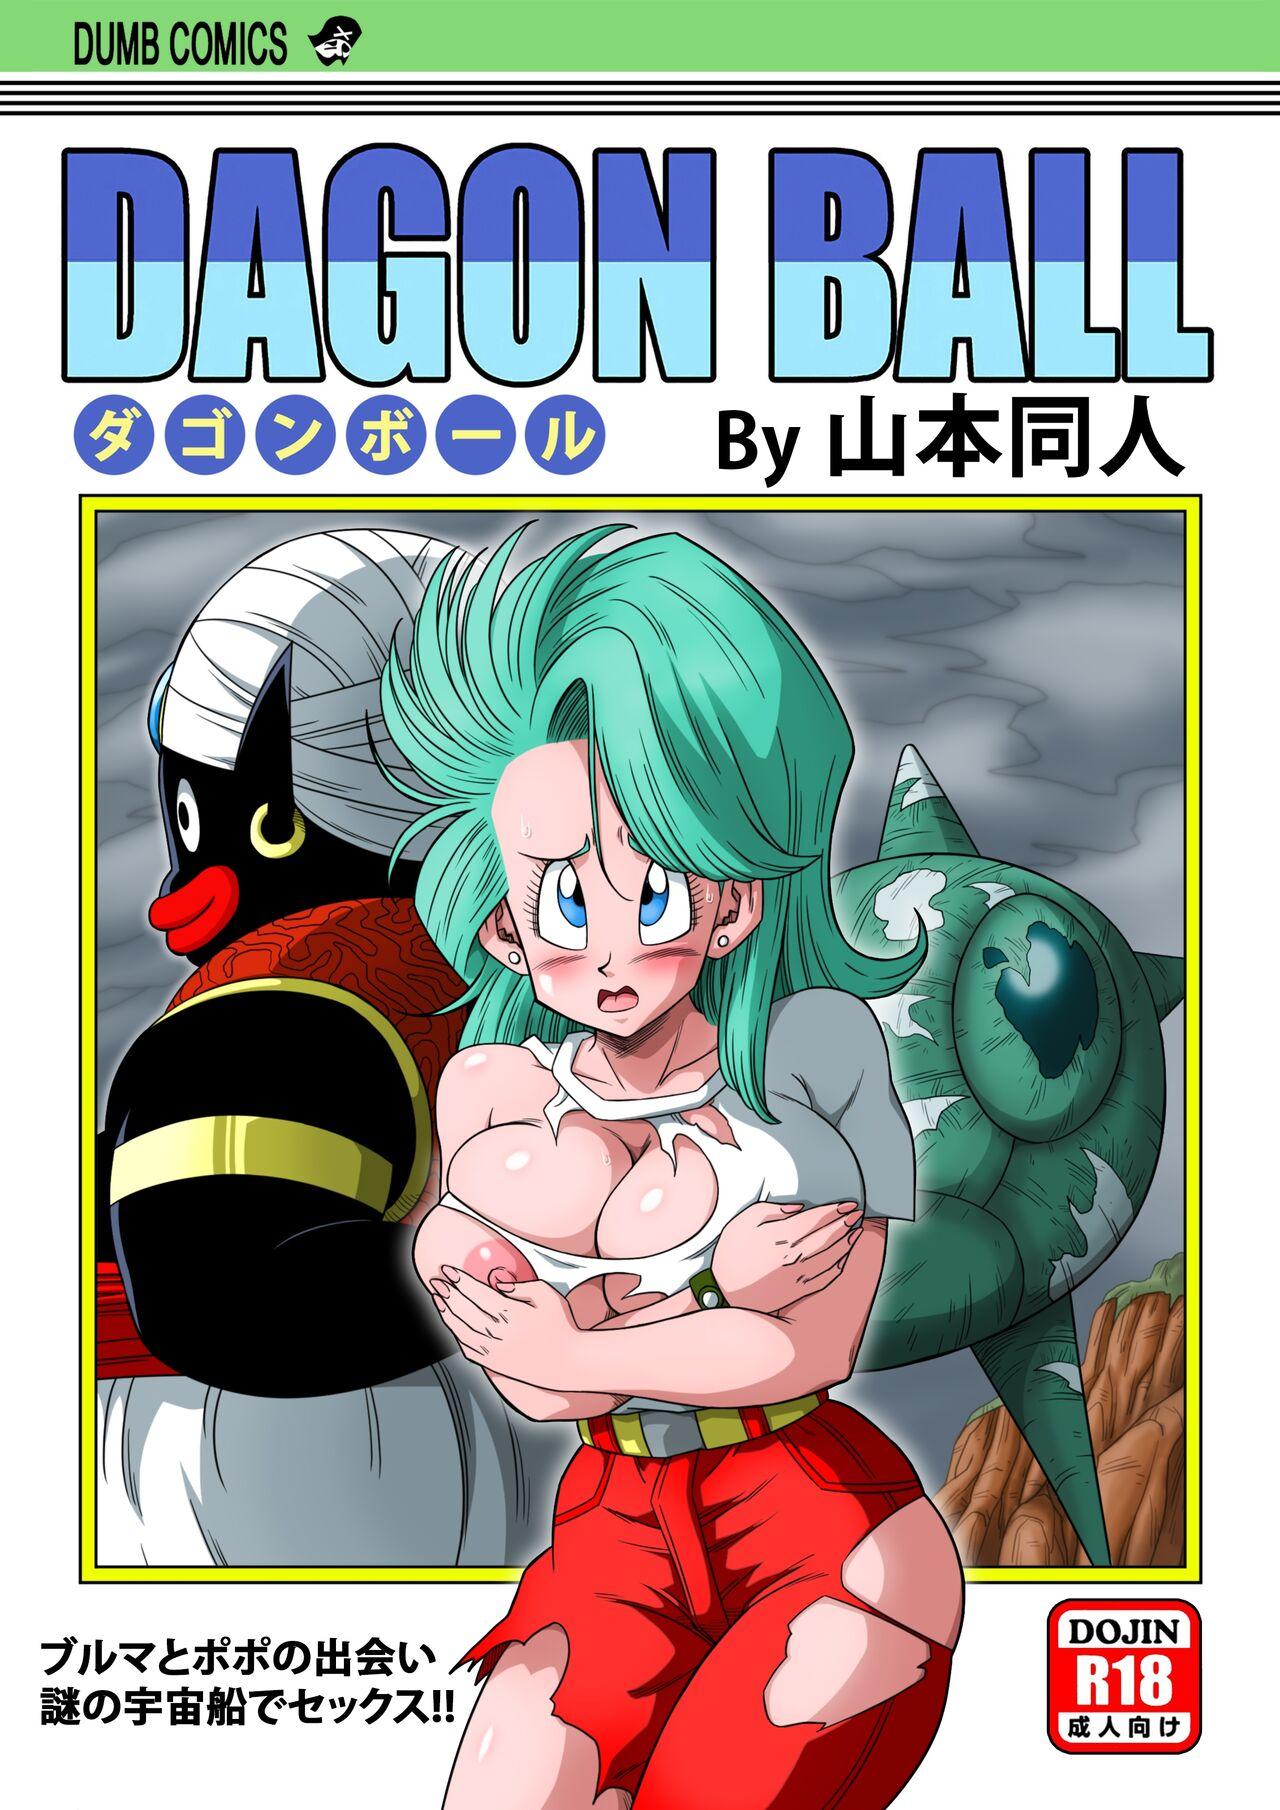 Cameltoe Bulma Meets Mr.Popo - Sex inside the Mysterious Spaceship! - Dragon ball z Daring - Page 1